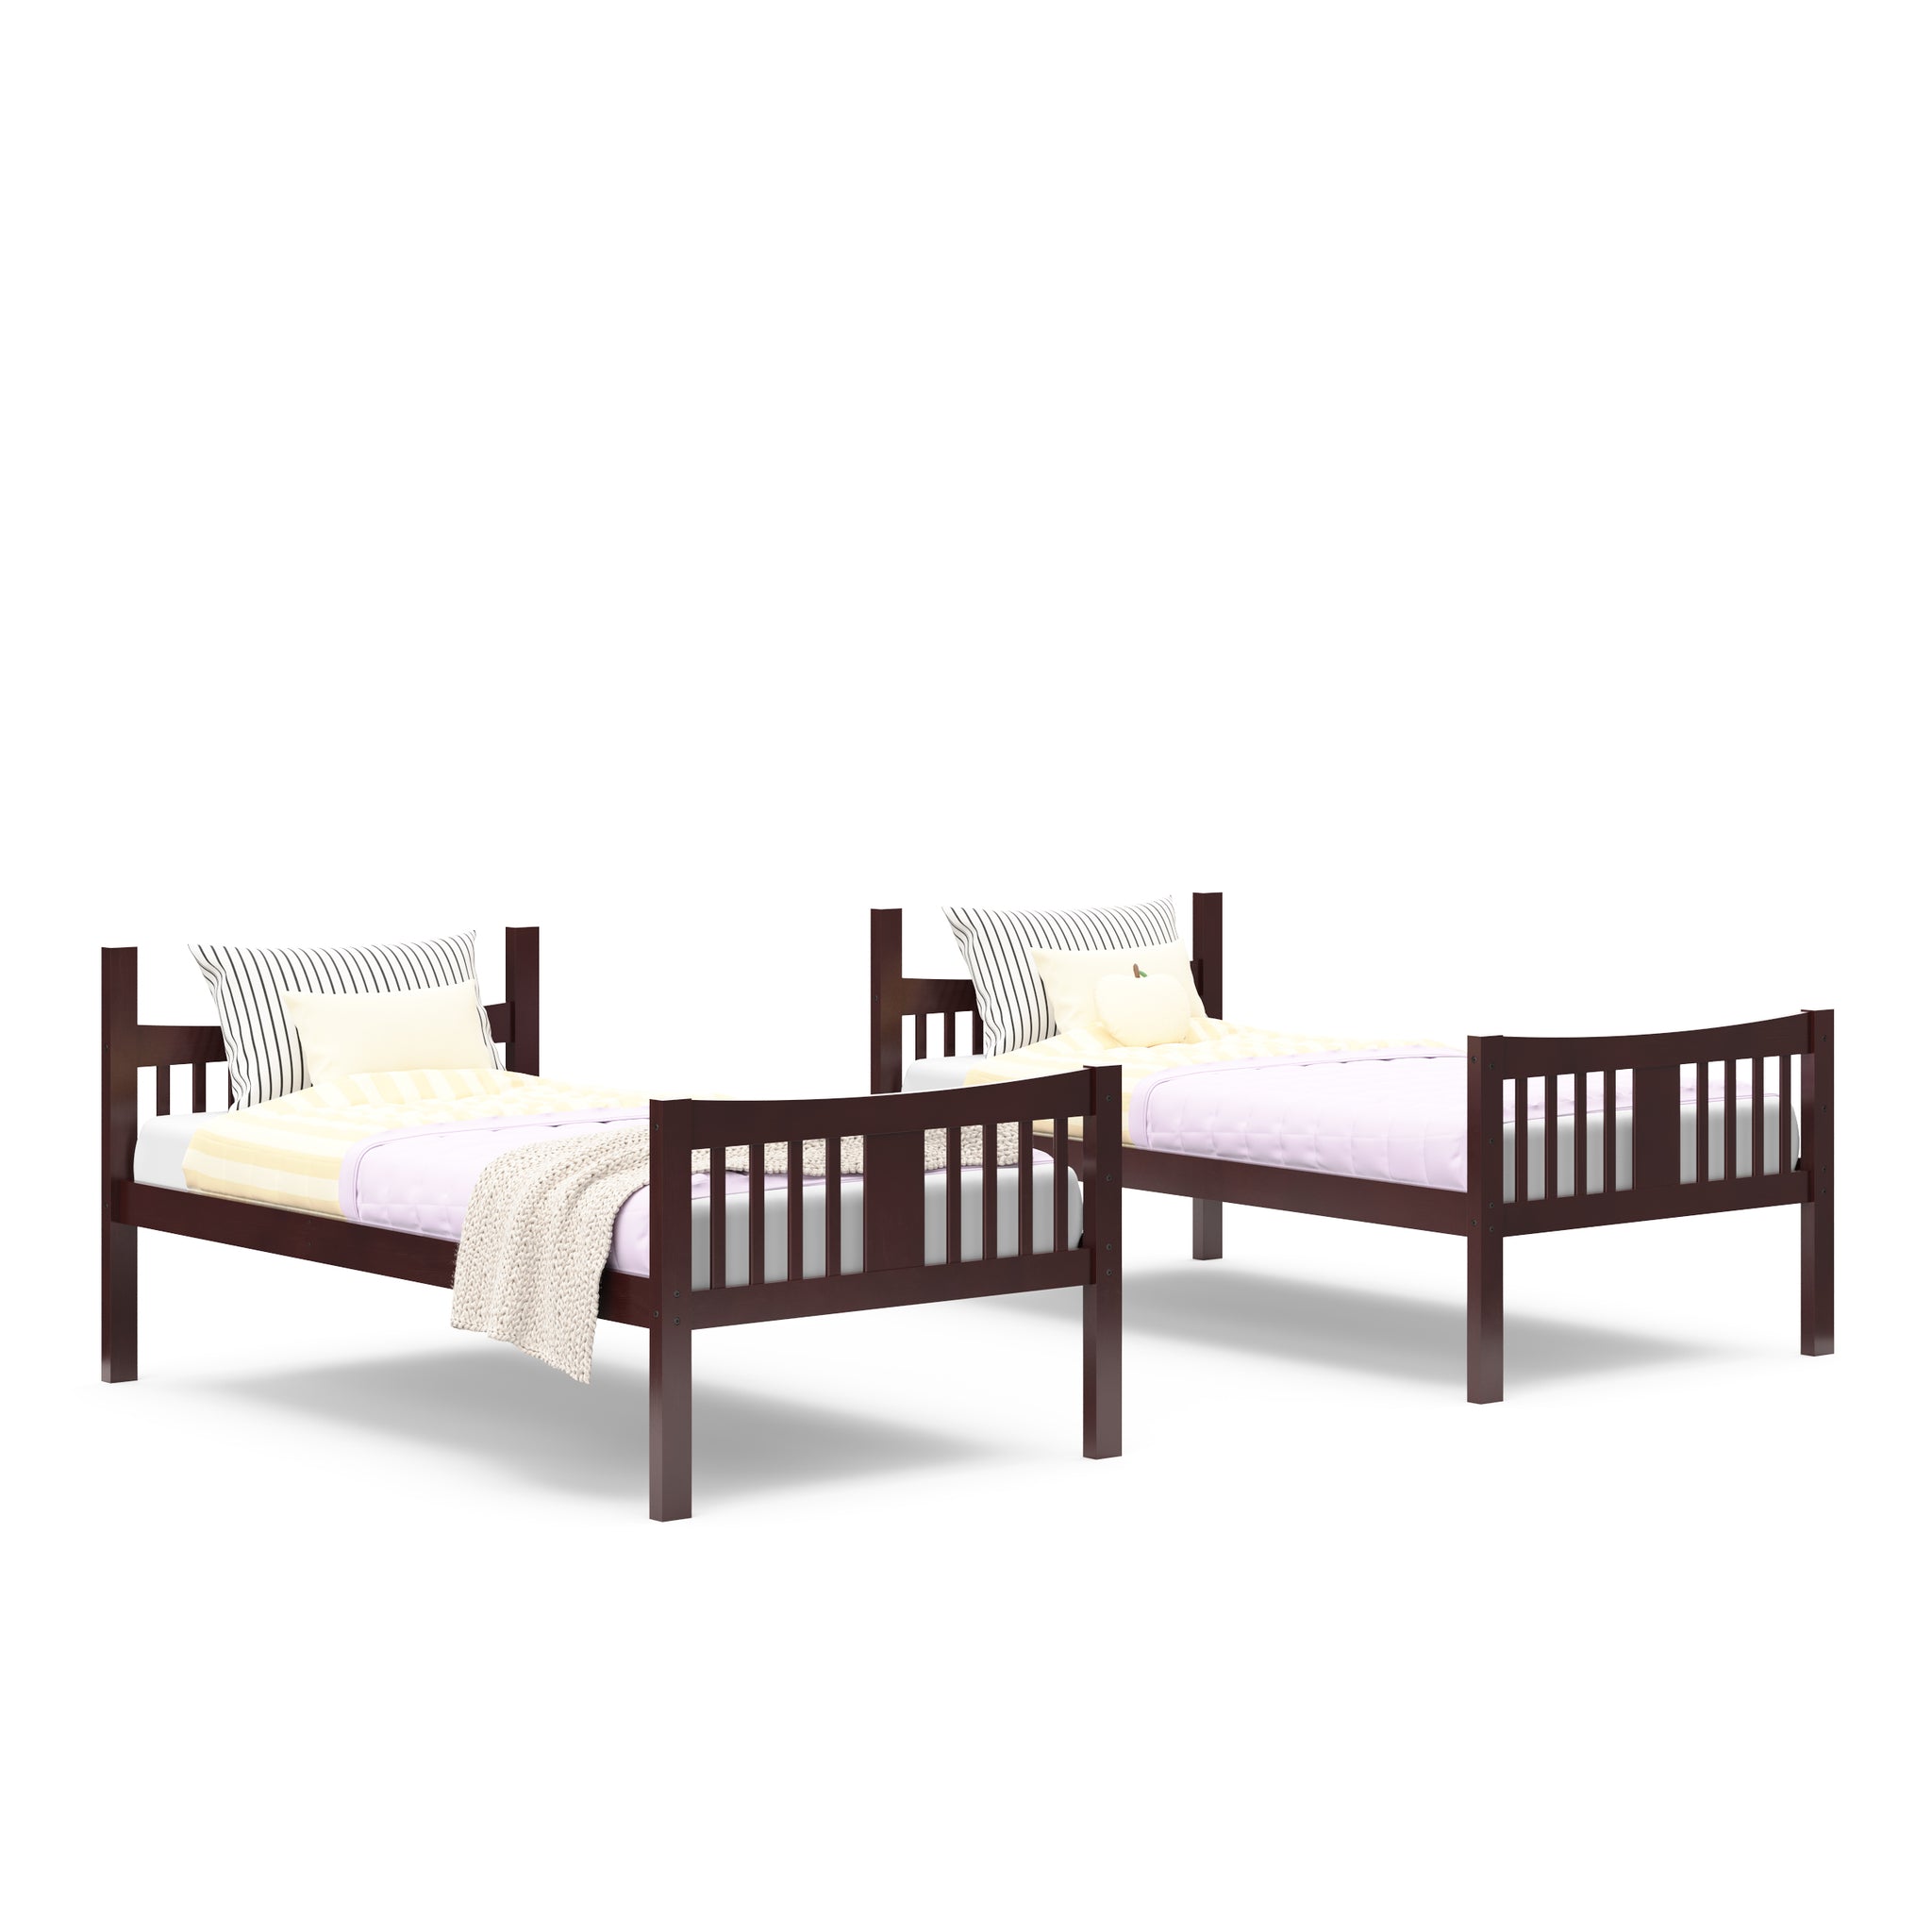 two espresso twin-size beds